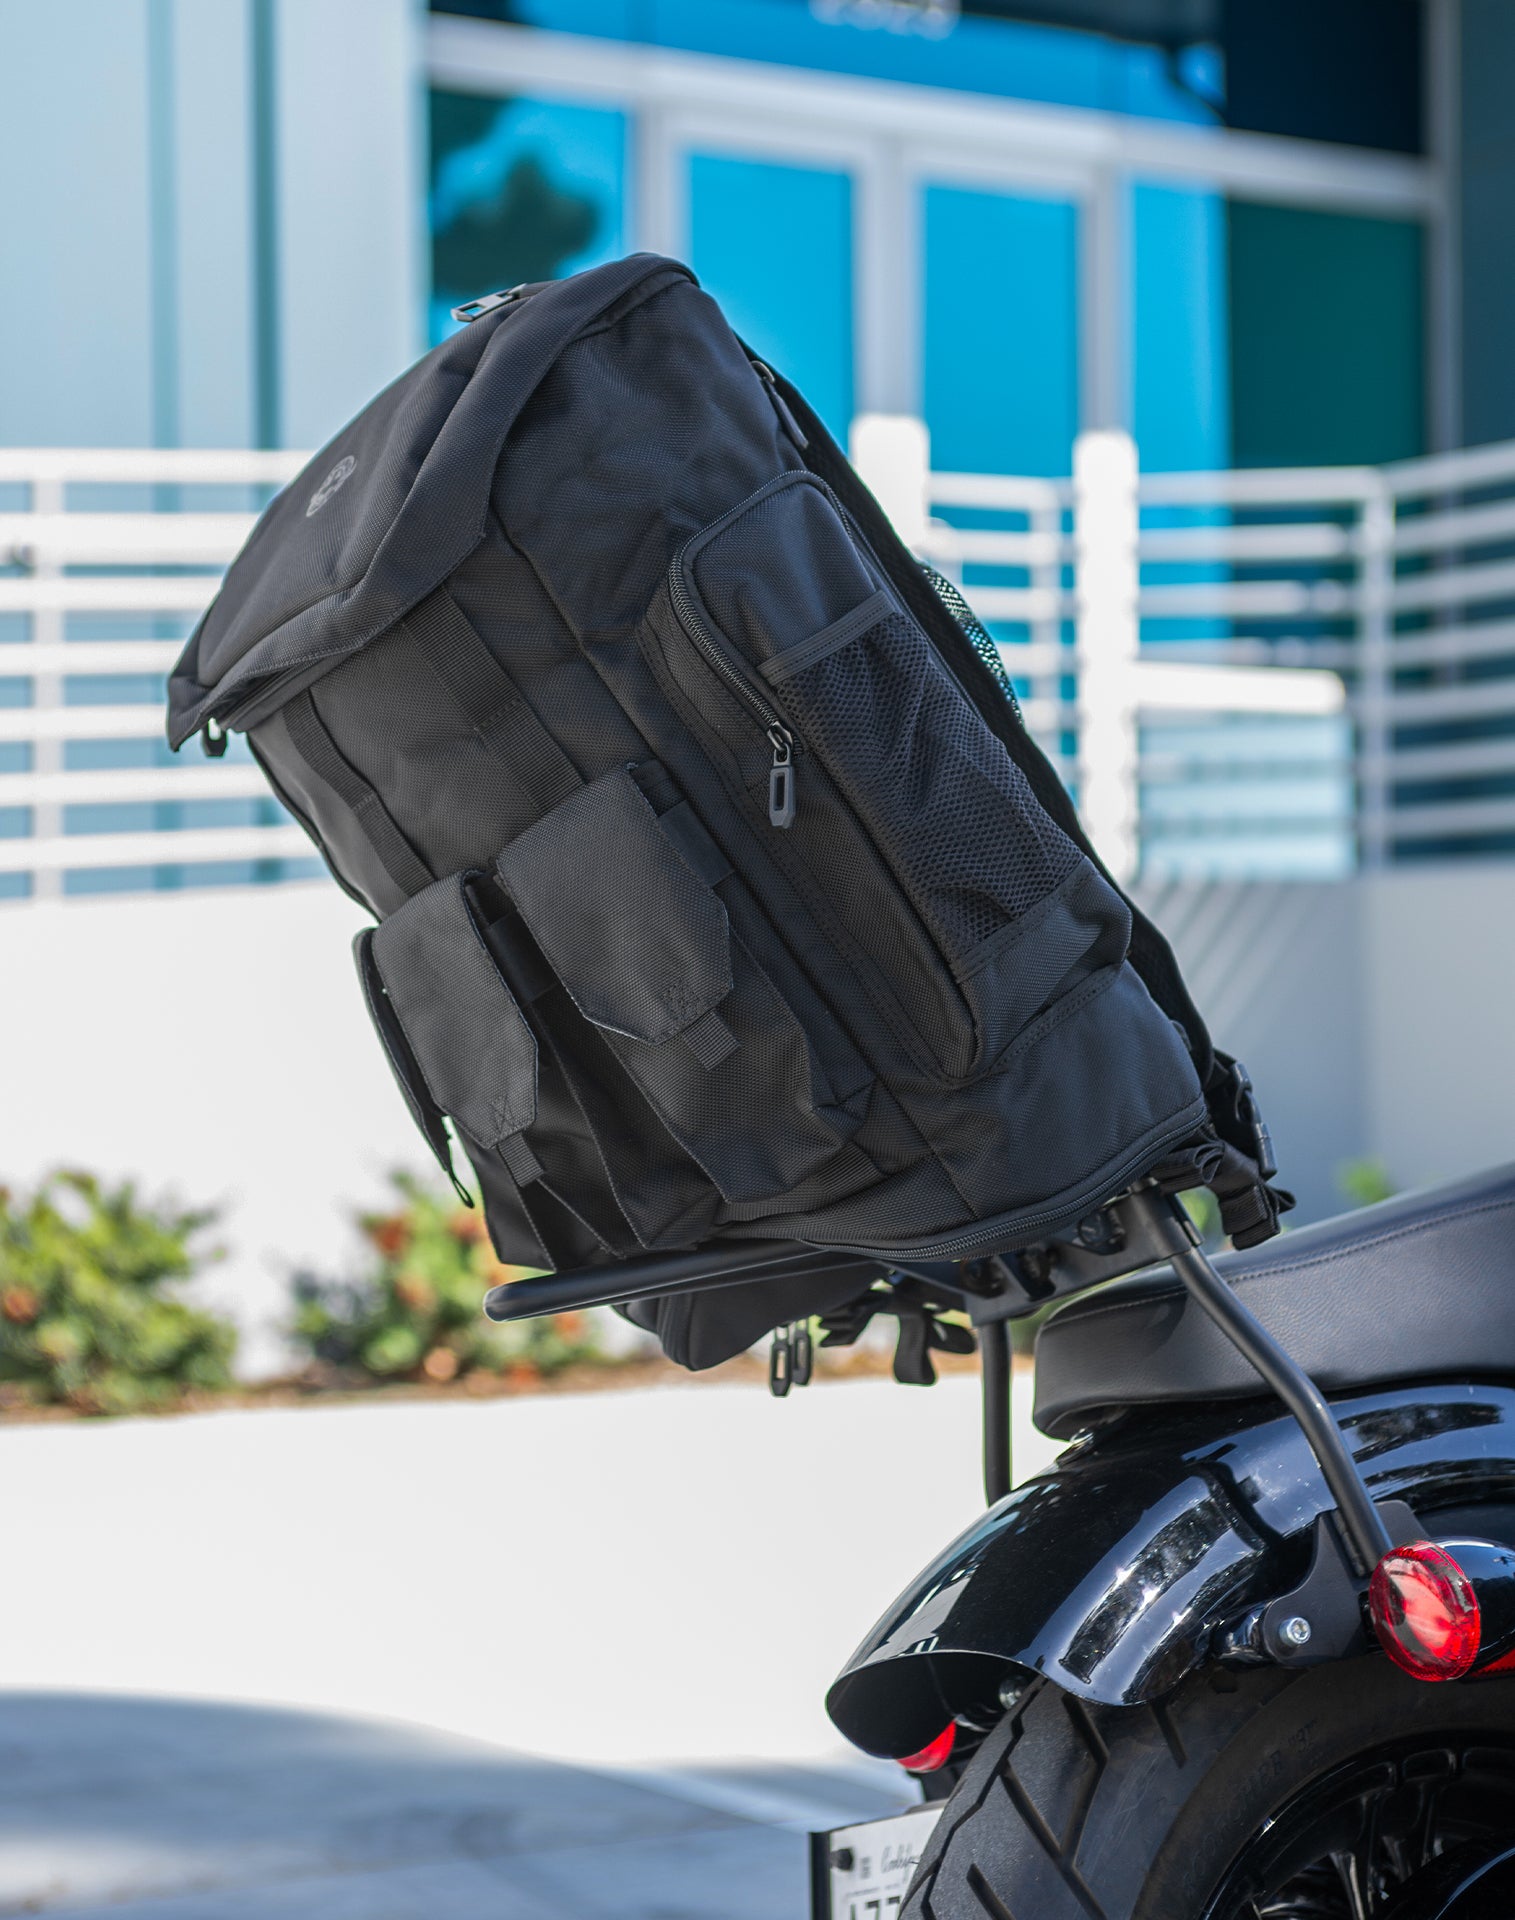 32L - Trident Large Indian Motorcycle Backpack